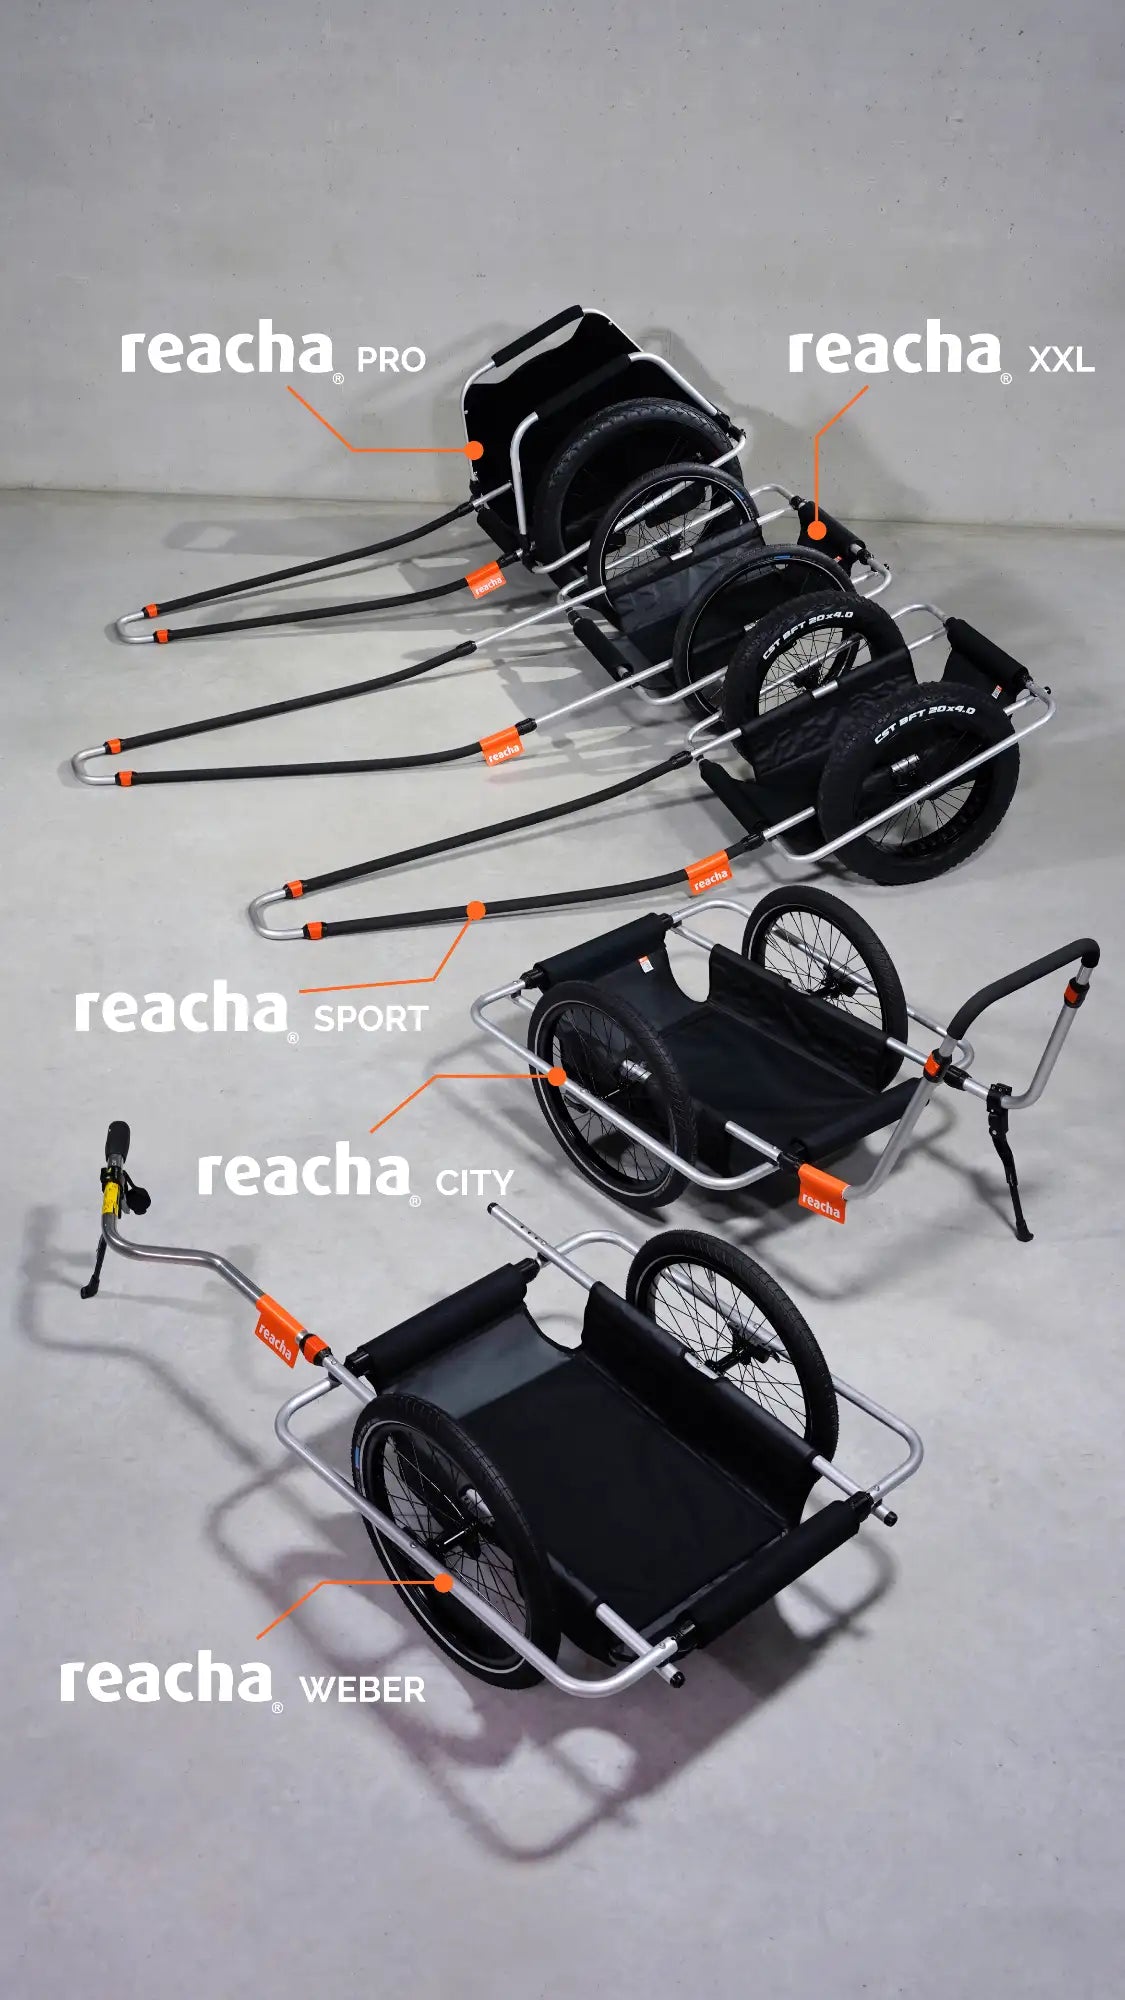 Overview of reacha bike trailers for transporting SUP, kayak, windsurf, surfboards, boats, wing foil and more.